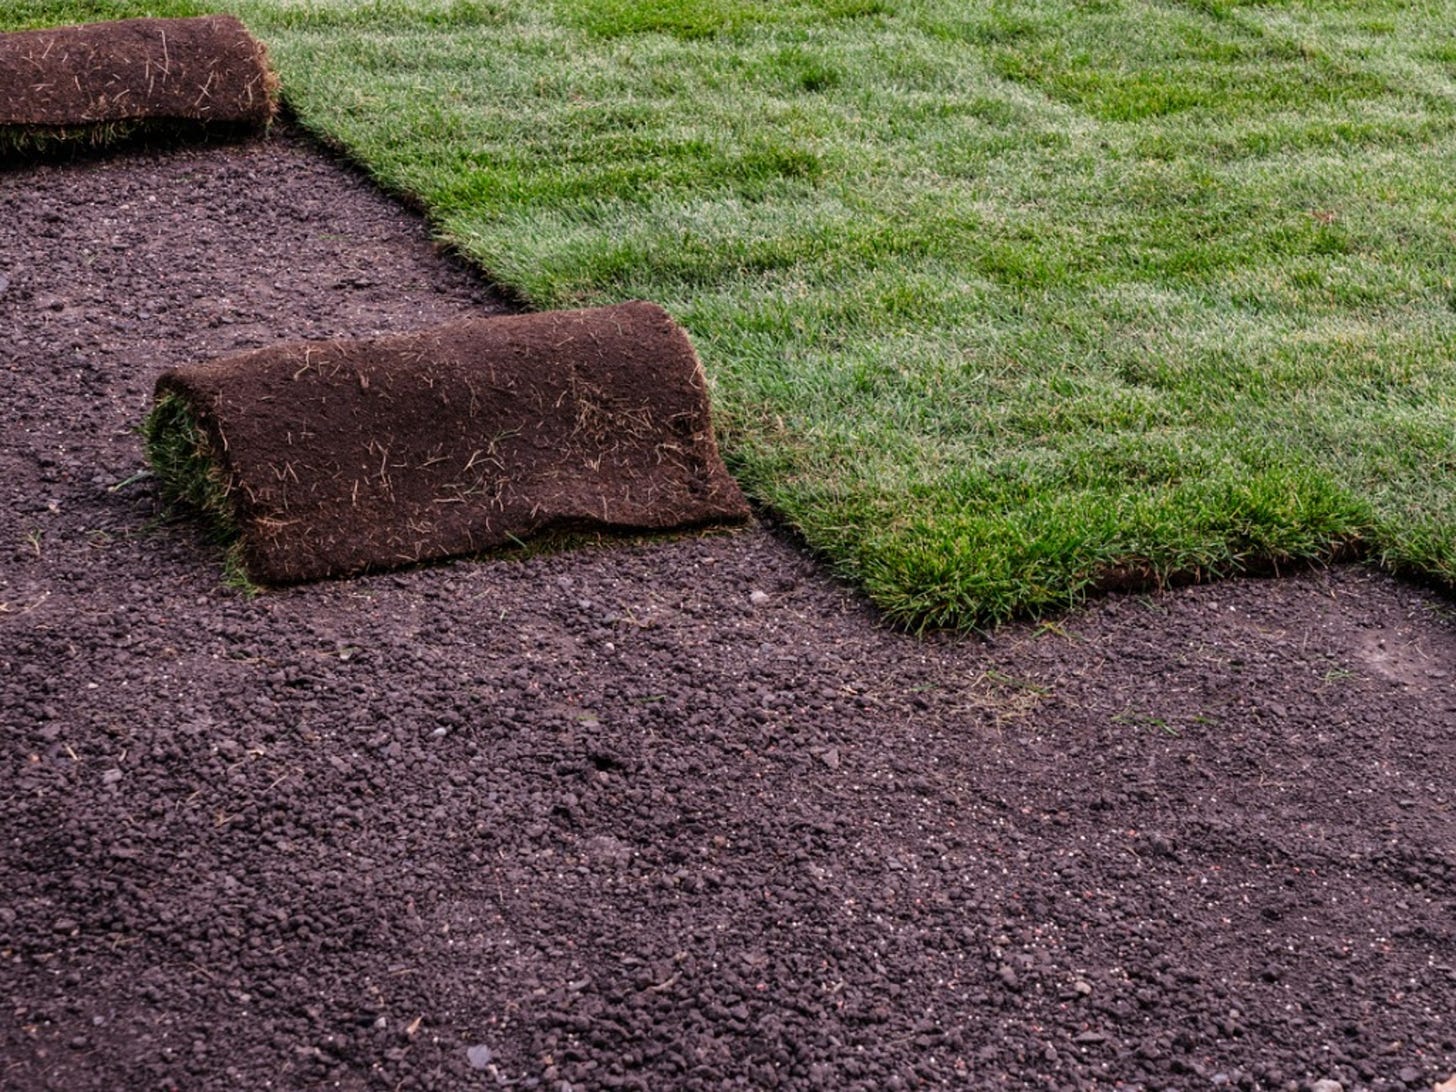 Sod Laying Instructions - How To Lay Sod &amp; Care For New Sod